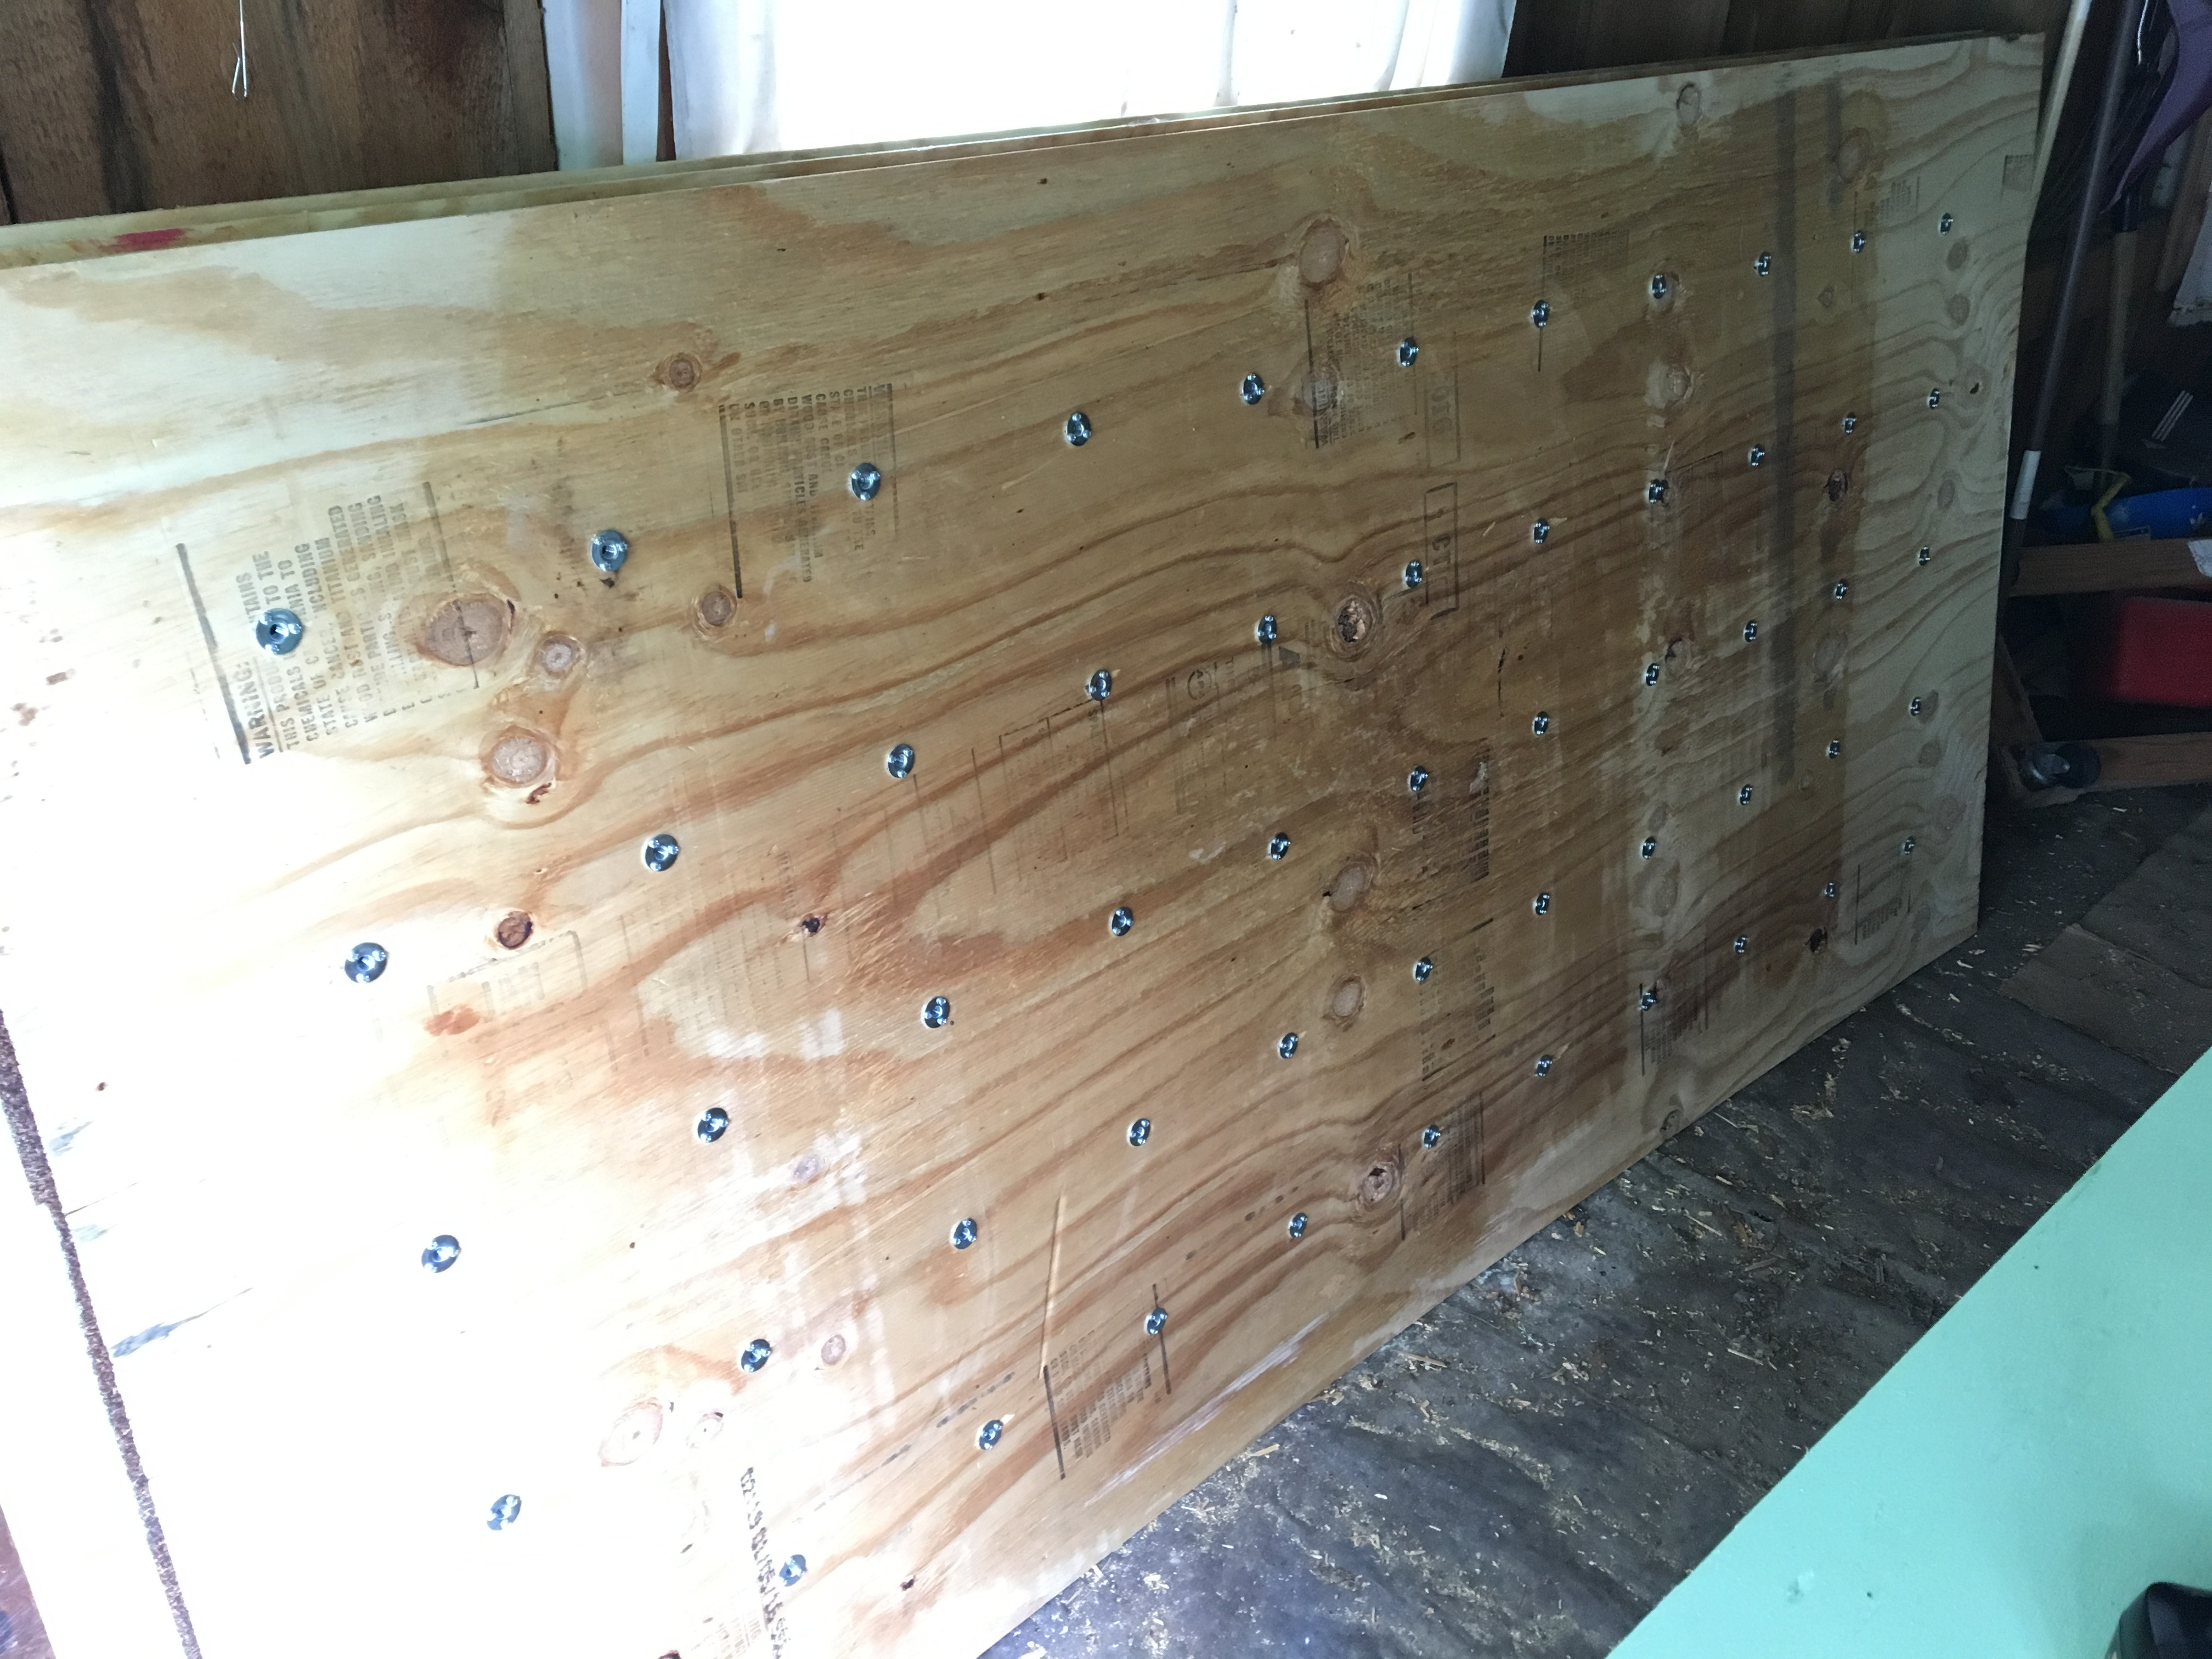 diy hardwood floor of my diy bouldering wall album on imgur within 55 t nuts per board 3 screws per nut 6 sheets of ply two of the boards had 6 rows instead of 5 1056 screws and 352 holes that sucked but id rather